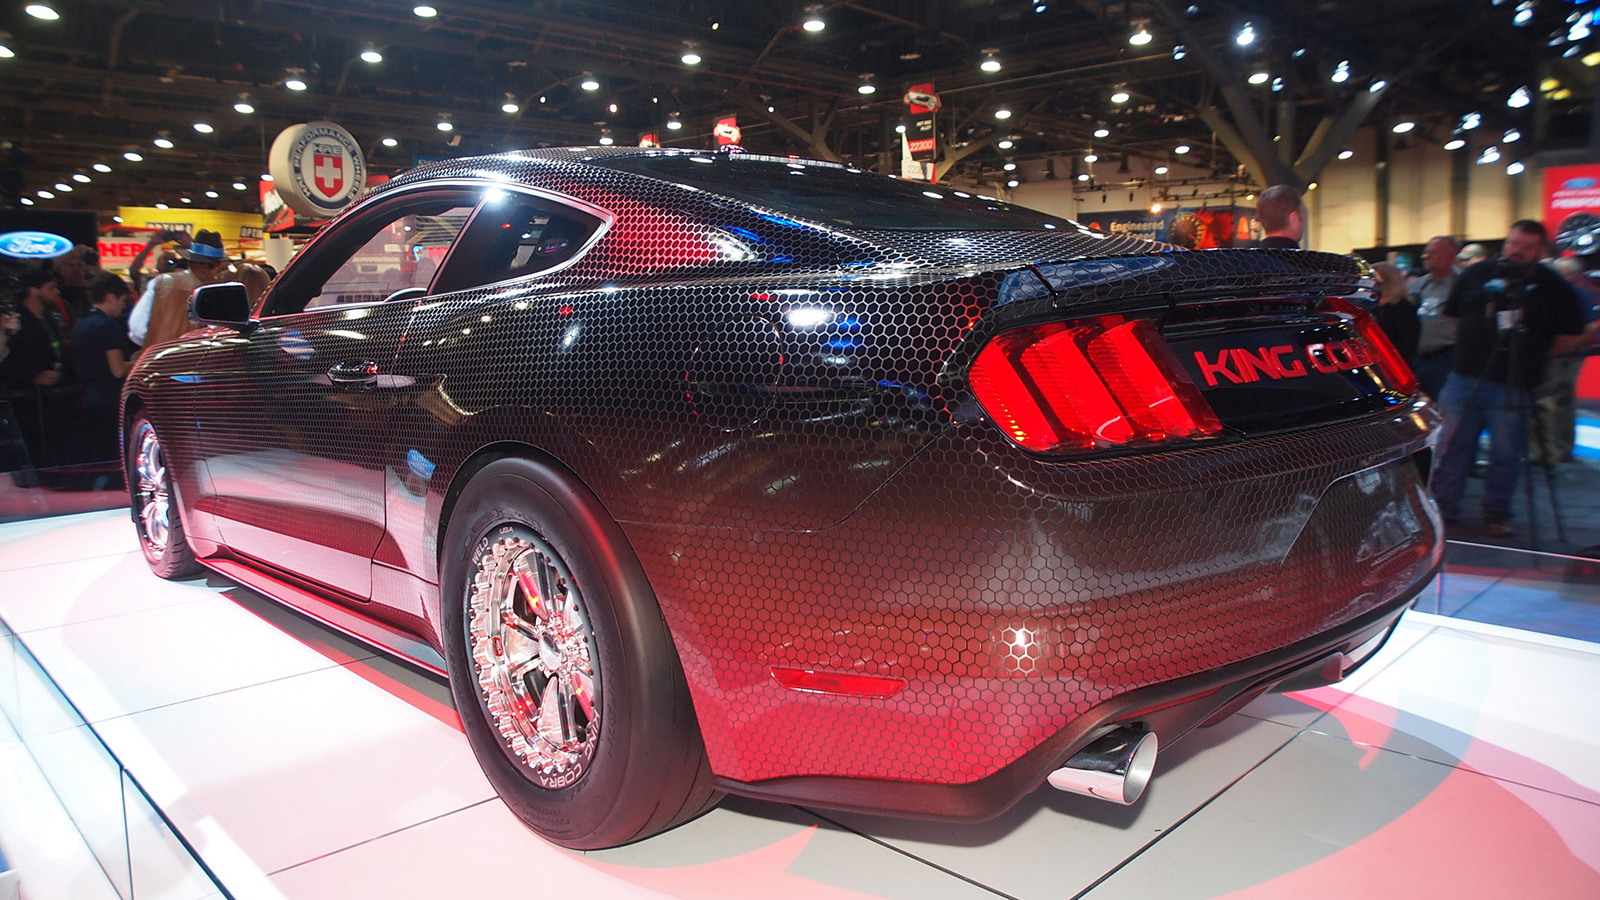 2015 Ford Mustang King Cobra by Ford Racing, 2014 SEMA show